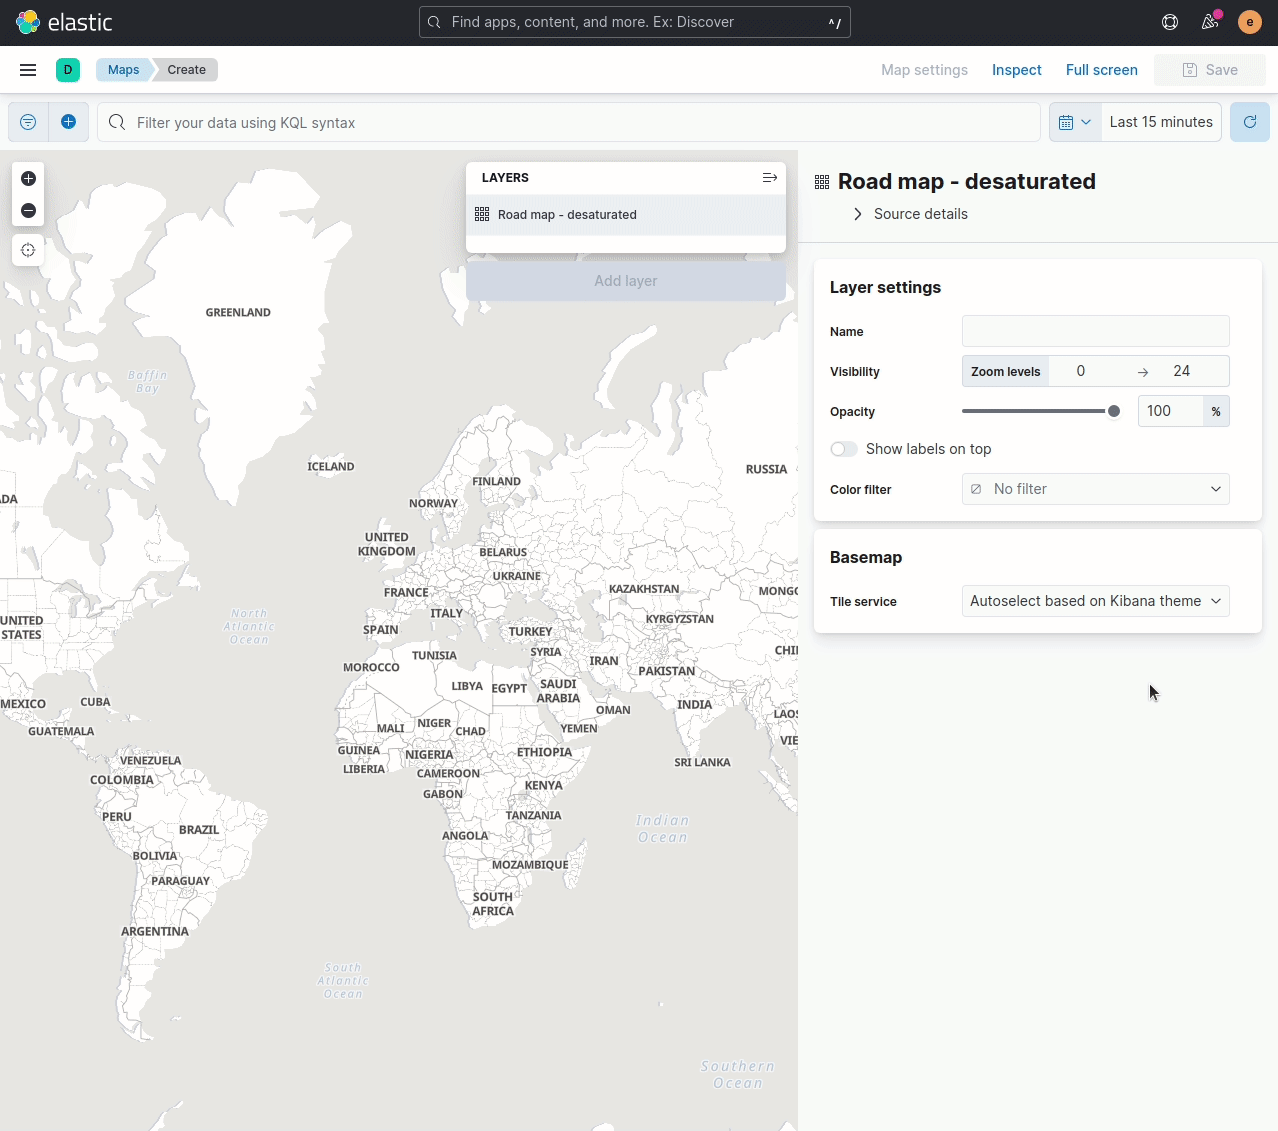 Customize the basemap color in a map